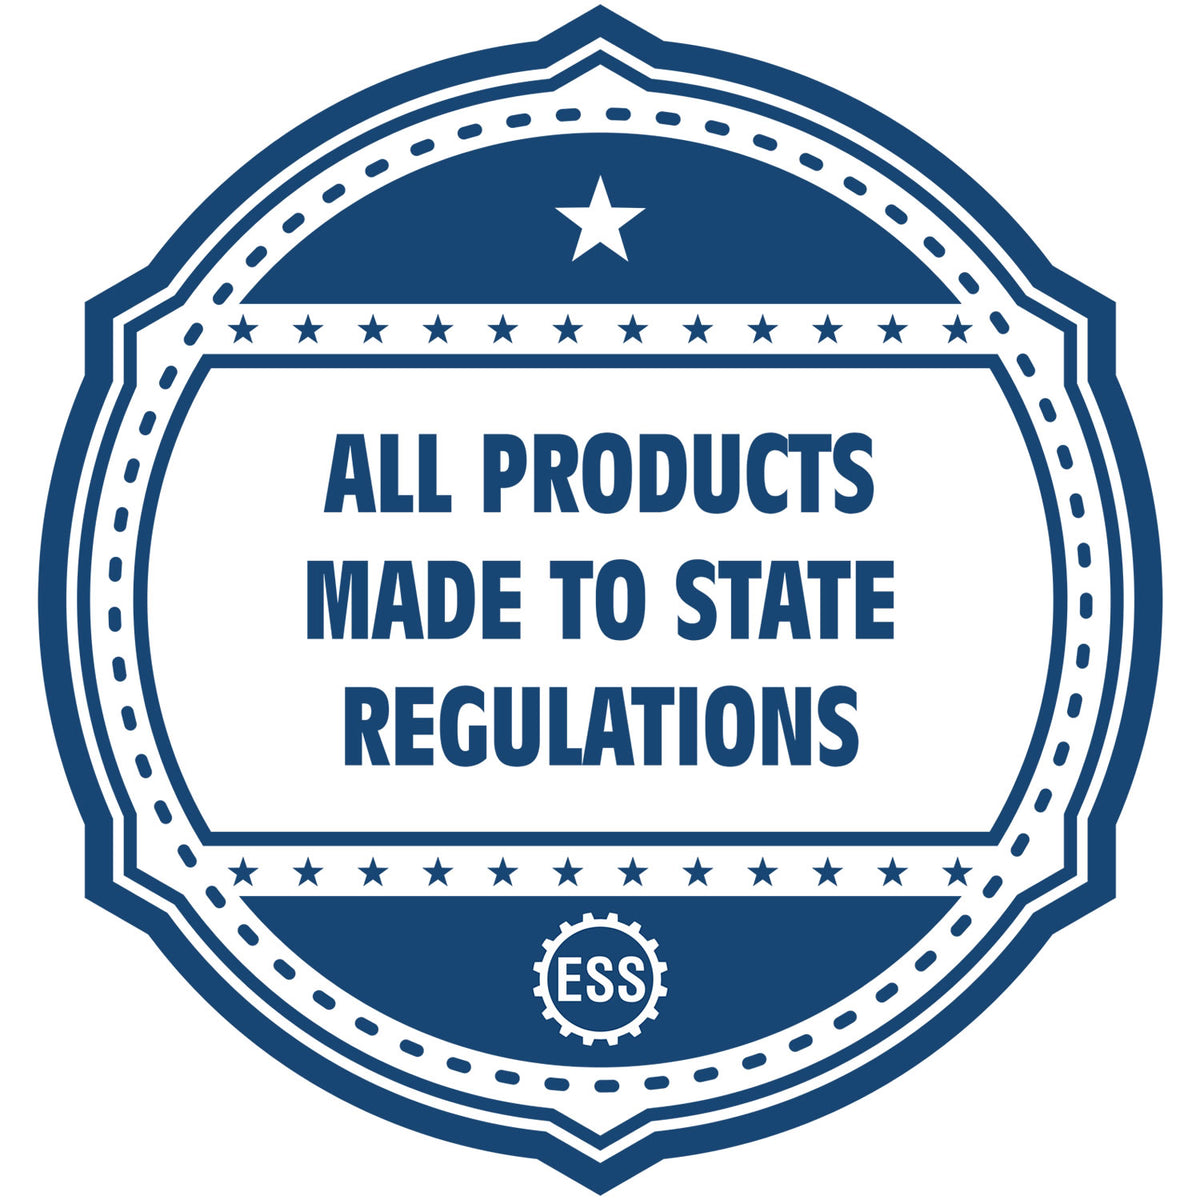 An icon or badge element for the Pennsylvania Engineer Desk Seal showing that this product is made in compliance with state regulations.